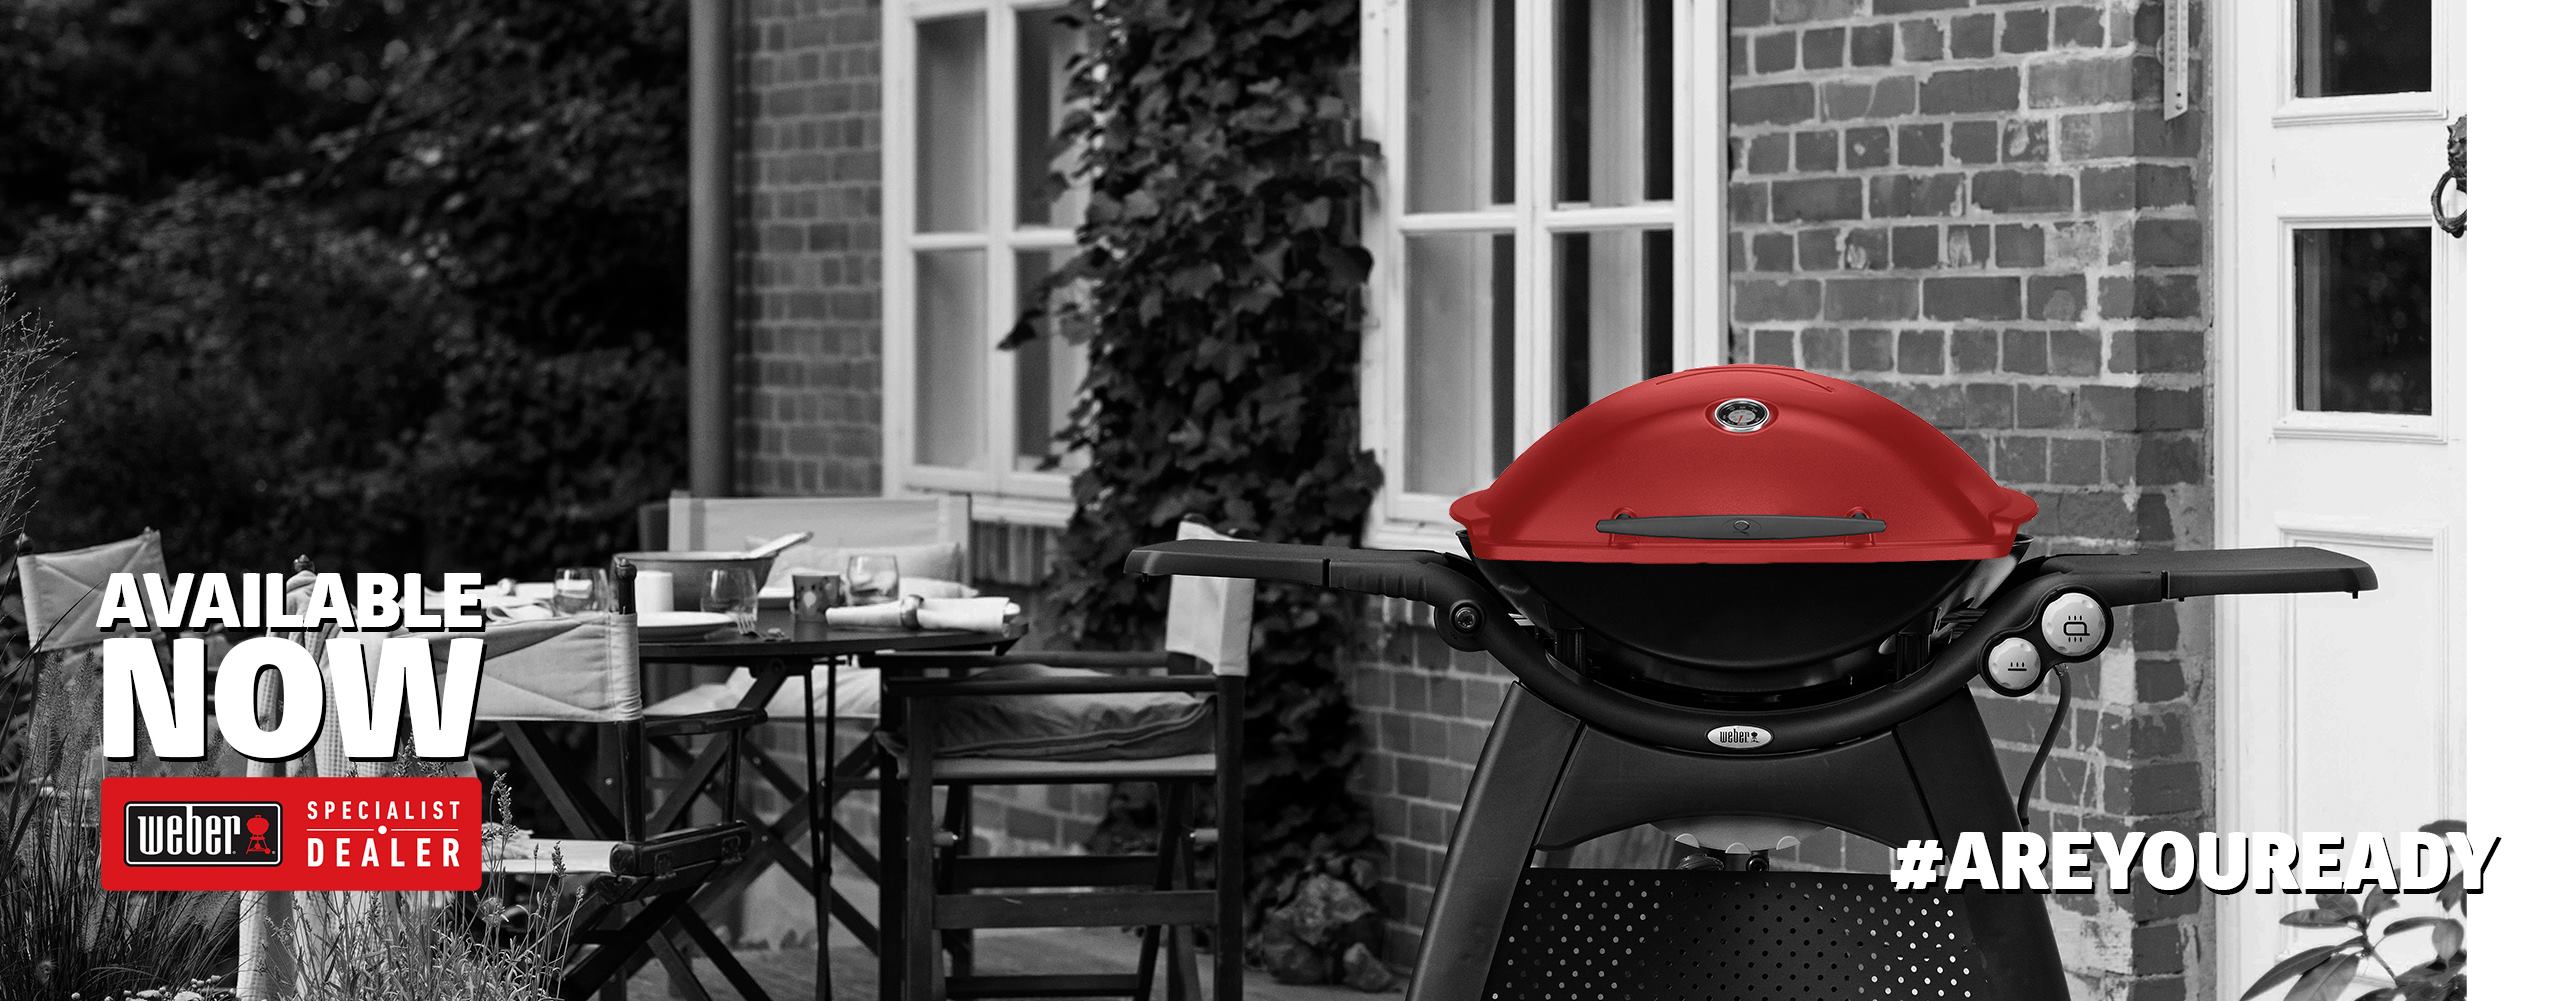 Get up to 10 Year limited time Warranty on Weber products